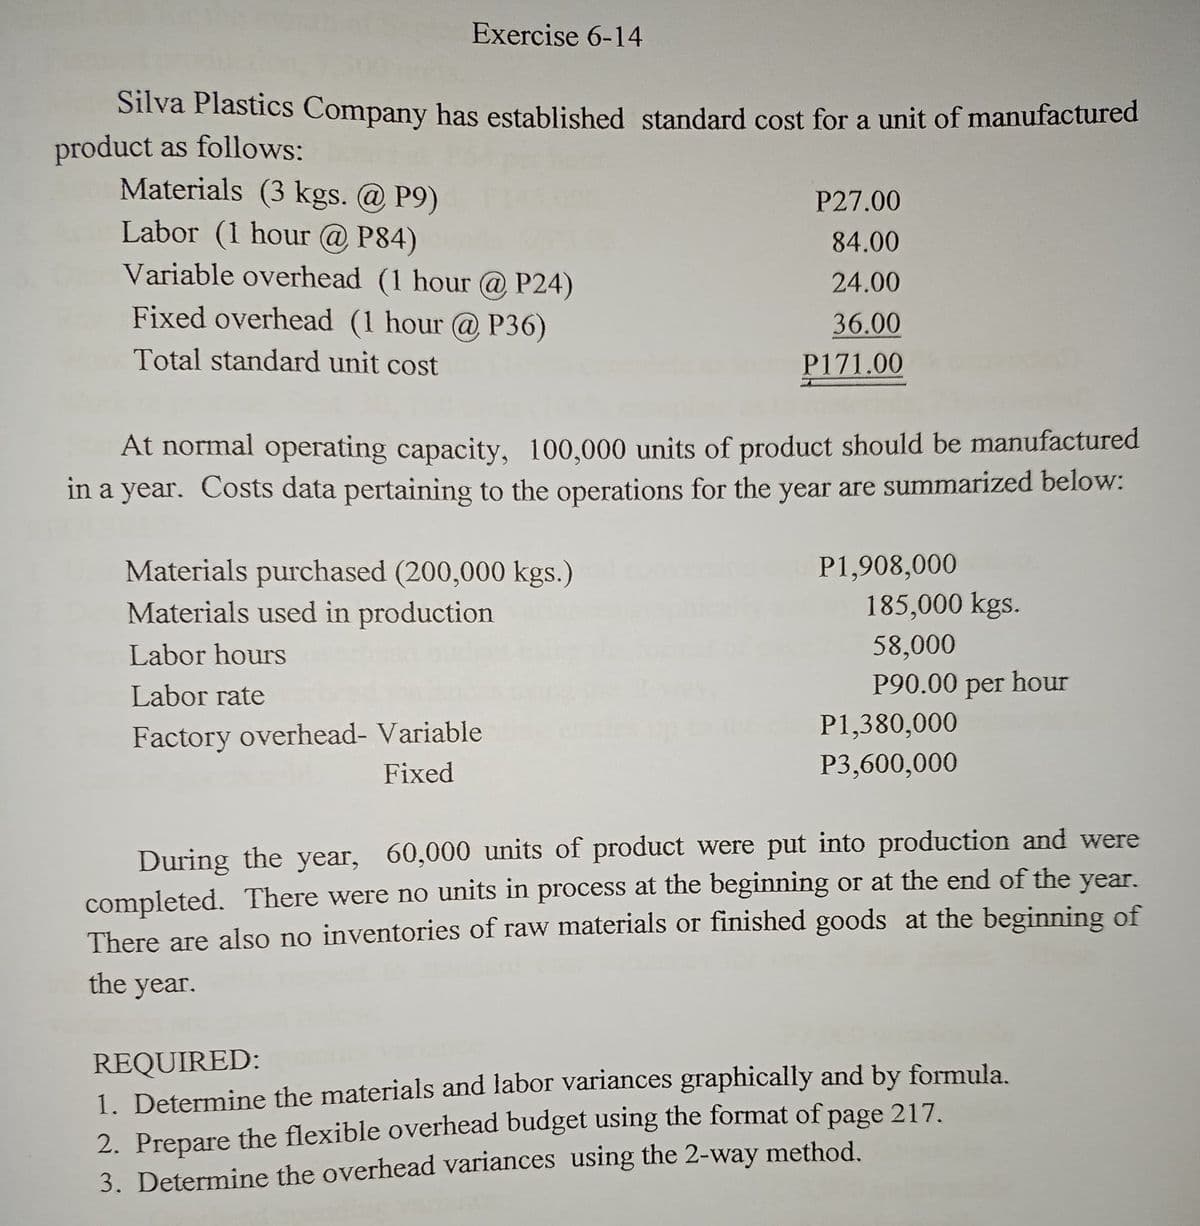 Exercise 6-14
Silva Plastics Company has established standard cost for a unit of manufactured
product as follows:
Materials (3 kgs. @ P9)
Labor (1 hour @ P84)
Variable overhead (1 hour @ P24)
Fixed overhead (1 hour @ P36)
P27.00
84.00
24.00
36.00
Total standard unit cost
P171.00
At normal operating capacity, 100,000 units of product should be manufactured
in a year. Costs data pertaining to the operations for the year are summarized below:
Materials purchased (200,000 kgs.)
Materials used in production
P1,908,000
185,000 kgs.
58,000
P90.00 per
Labor hours
hour
Labor rate
P1,380,000
Factory overhead- Variable
Fixed
P3,600,000
During the year, 60,000 units of product were put into production and were
completed. There were no units in process at the beginning or at the end of the year.
There are also no inventories of raw materials or finished goods at the beginning of
the year.
REQUIRED:
1. Determine the materials and labor variances graphically and by formula,
2. Prepare the flexible overhead budget using the format of page 217.
3. Determine the overhead variances using the 2-way method.
